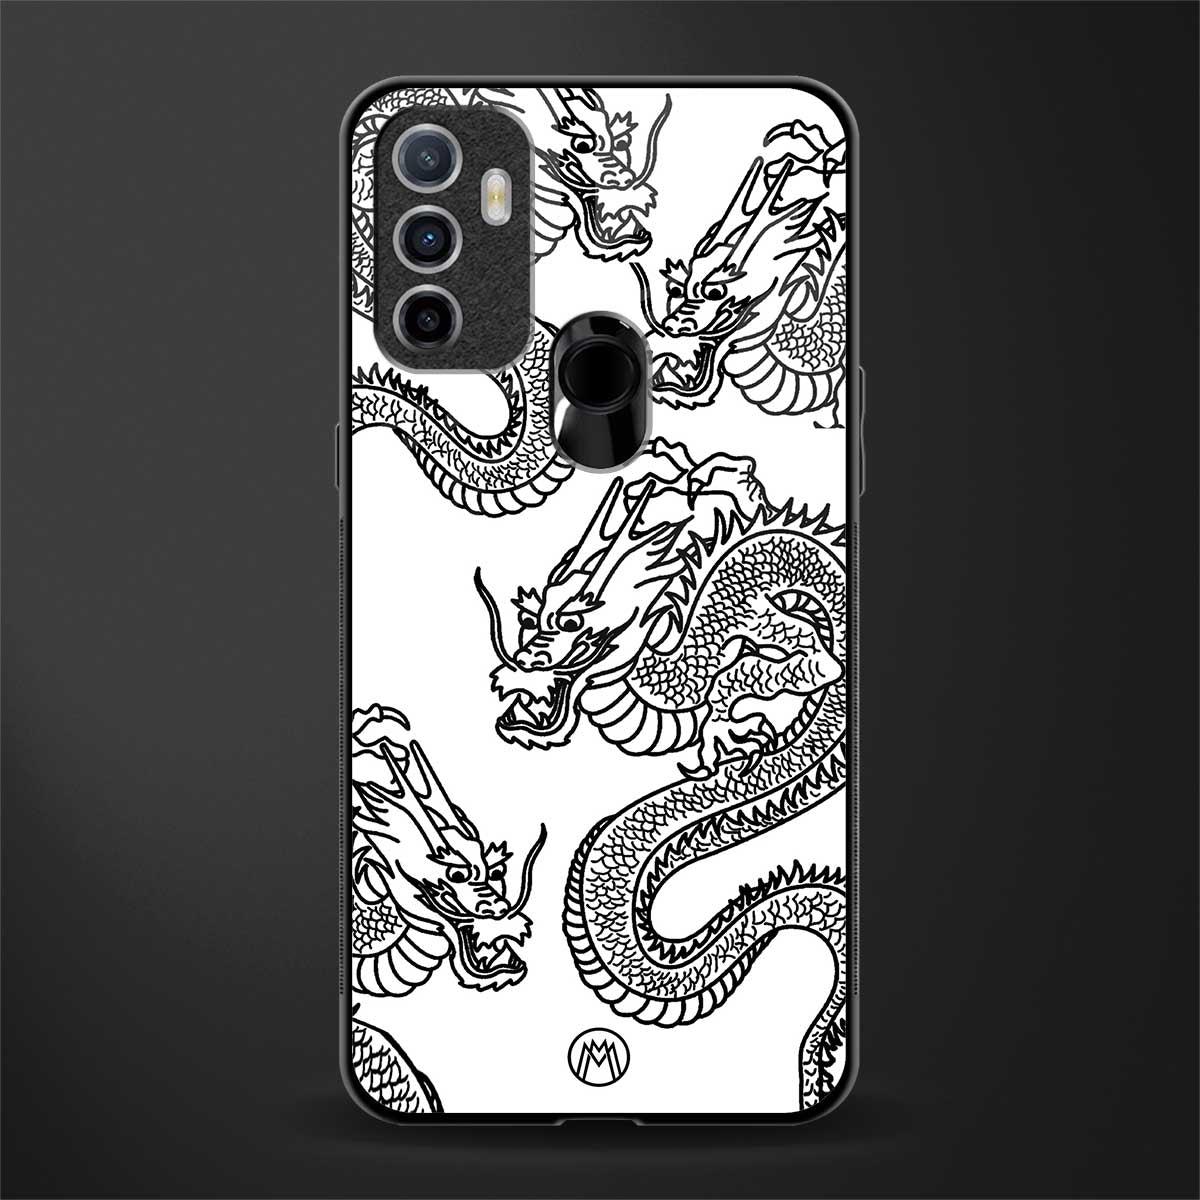 dragons lite glass case for oppo a53 image